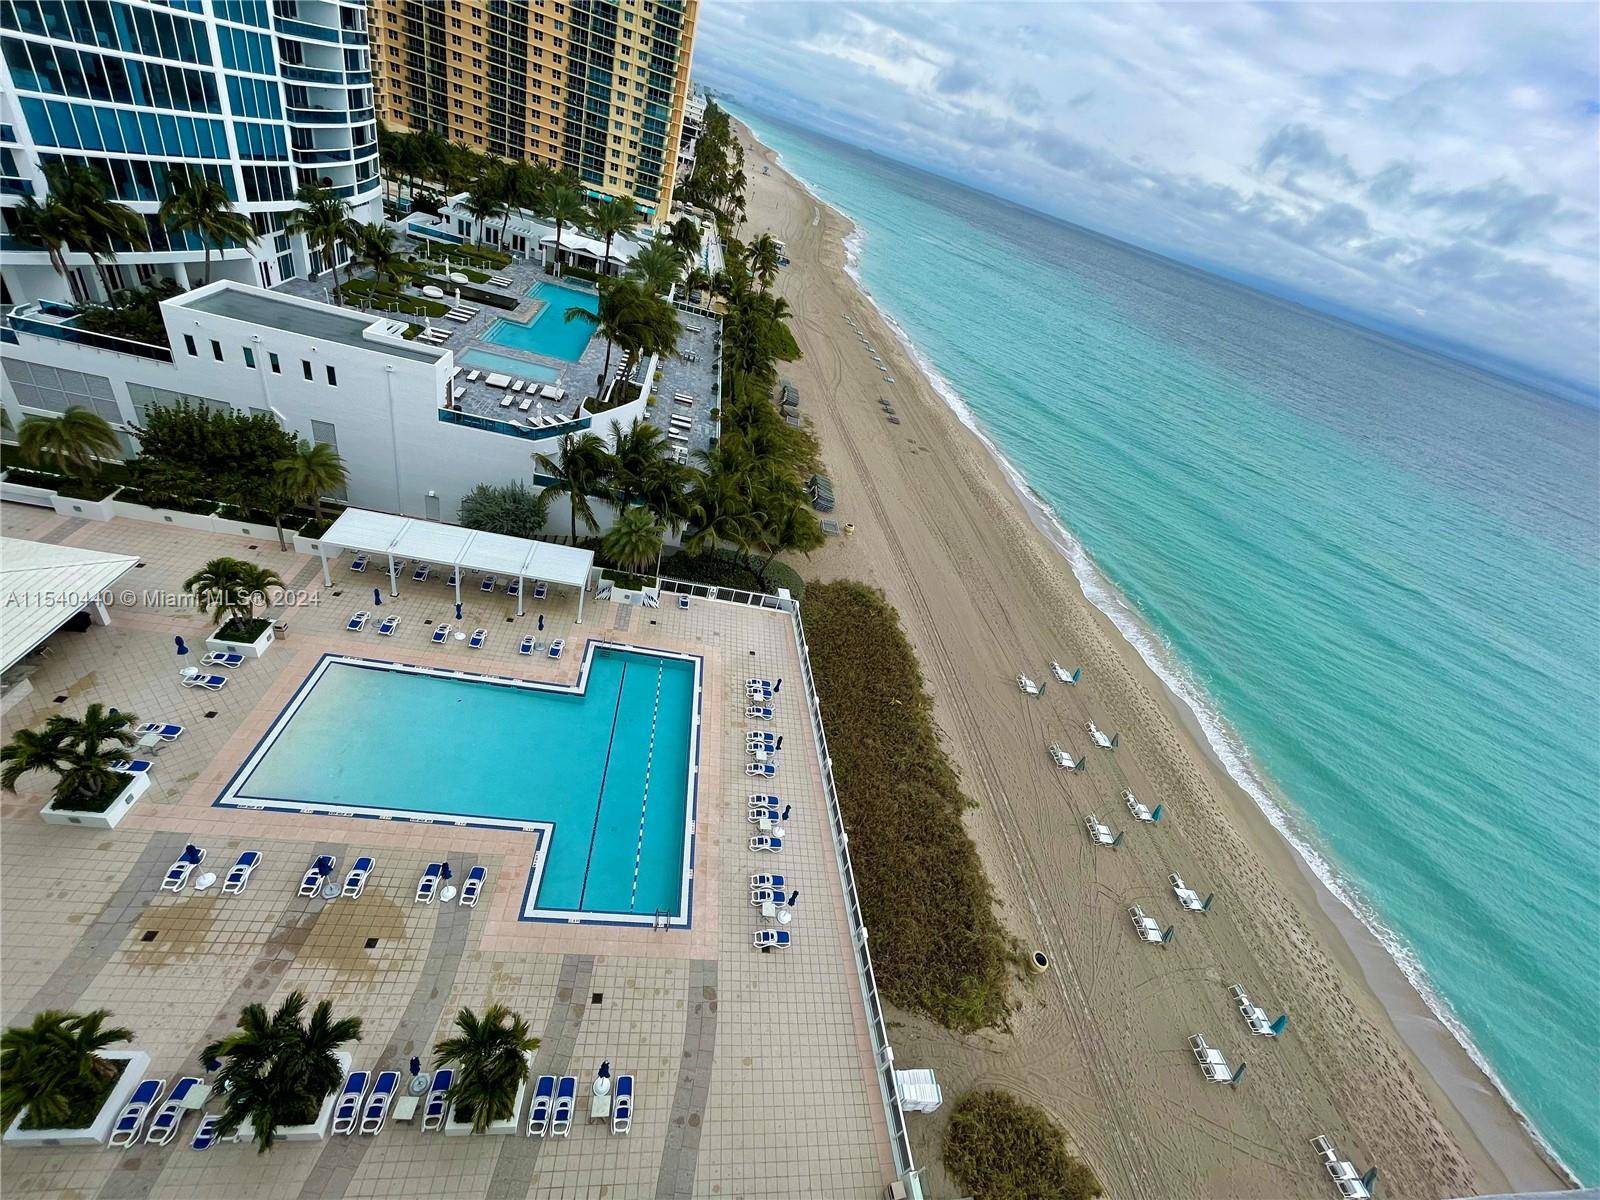 SPETACULAR 3 BED 2 BATH WITH OCEAN VIEWS DESIRED CORNER 04 UNIT IN SOUTH TOWER INCREDIBLE VIEWS FROM THE WHOLE UNIT, INCLUDING INTERCOASTAL VIEW FROM THE WRAP AROUND BALCONY TO ...